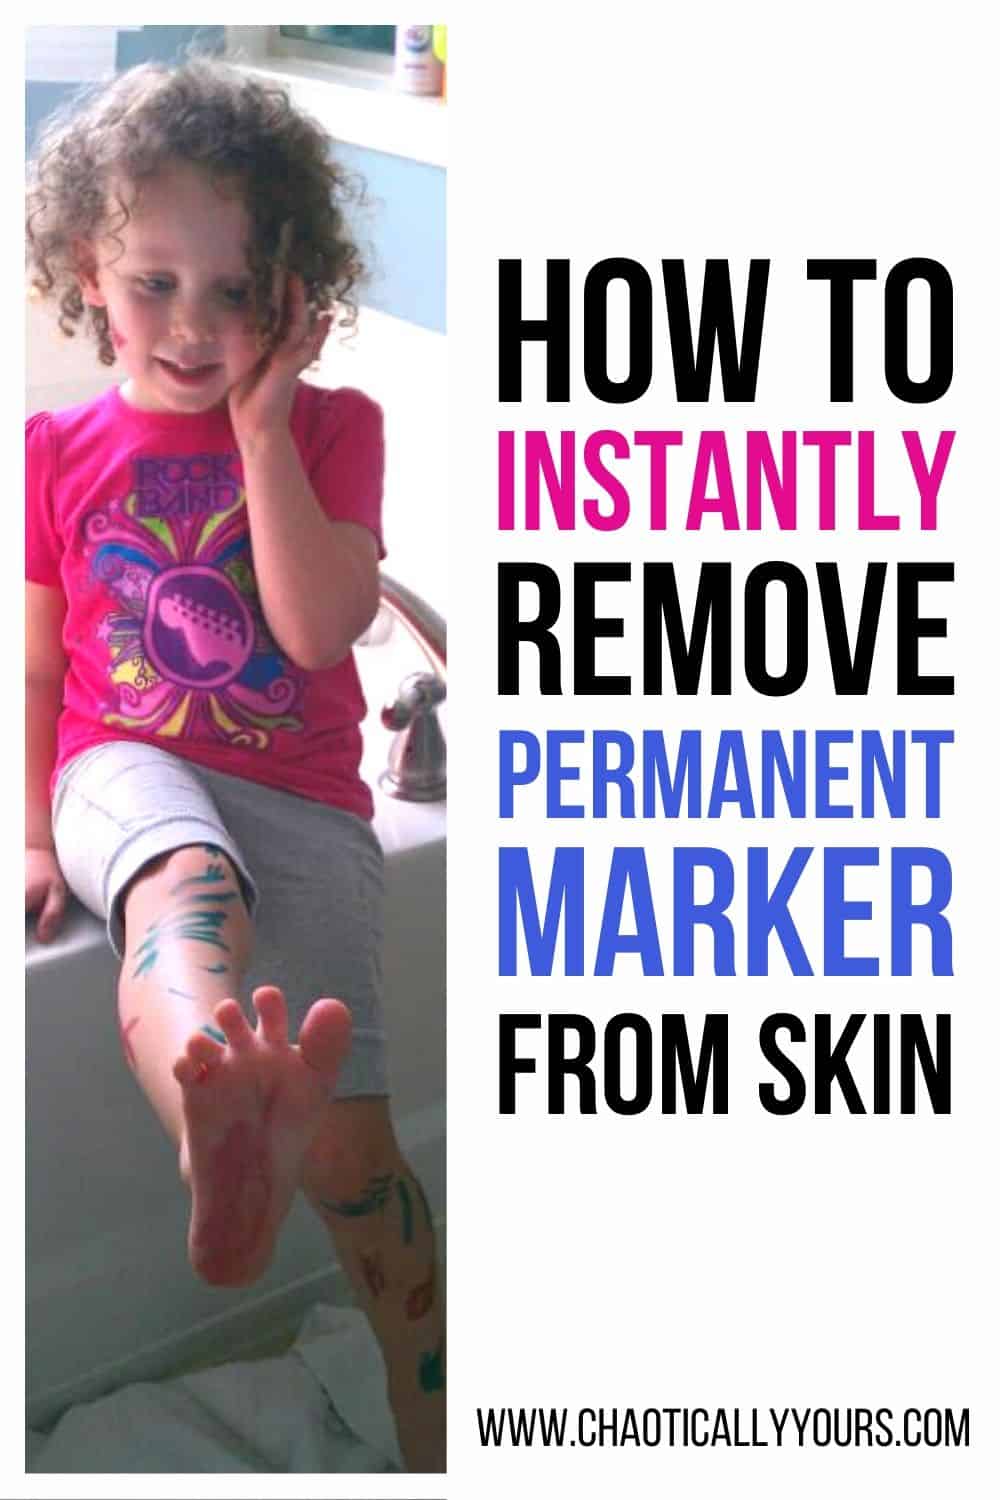 How To Instantly Remove Permanent Marker from Skin